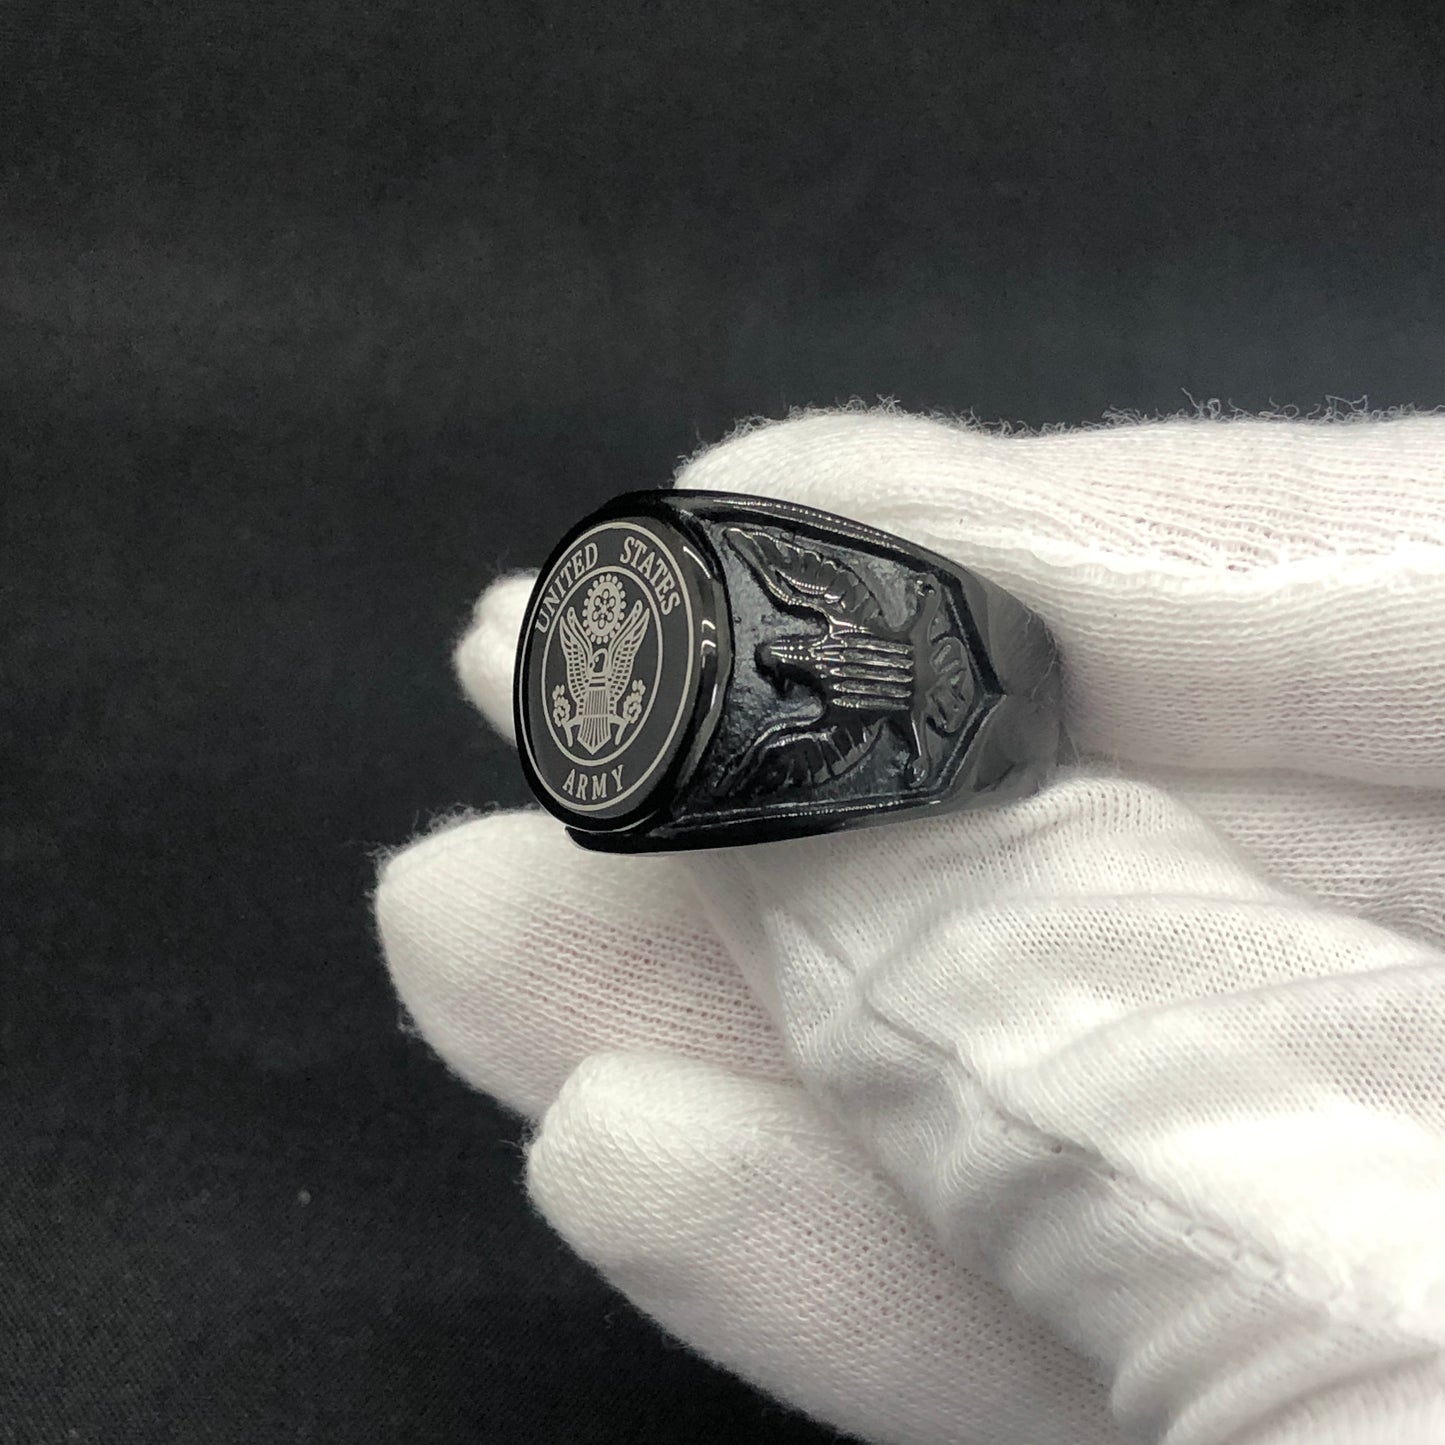 US Military Army Ring